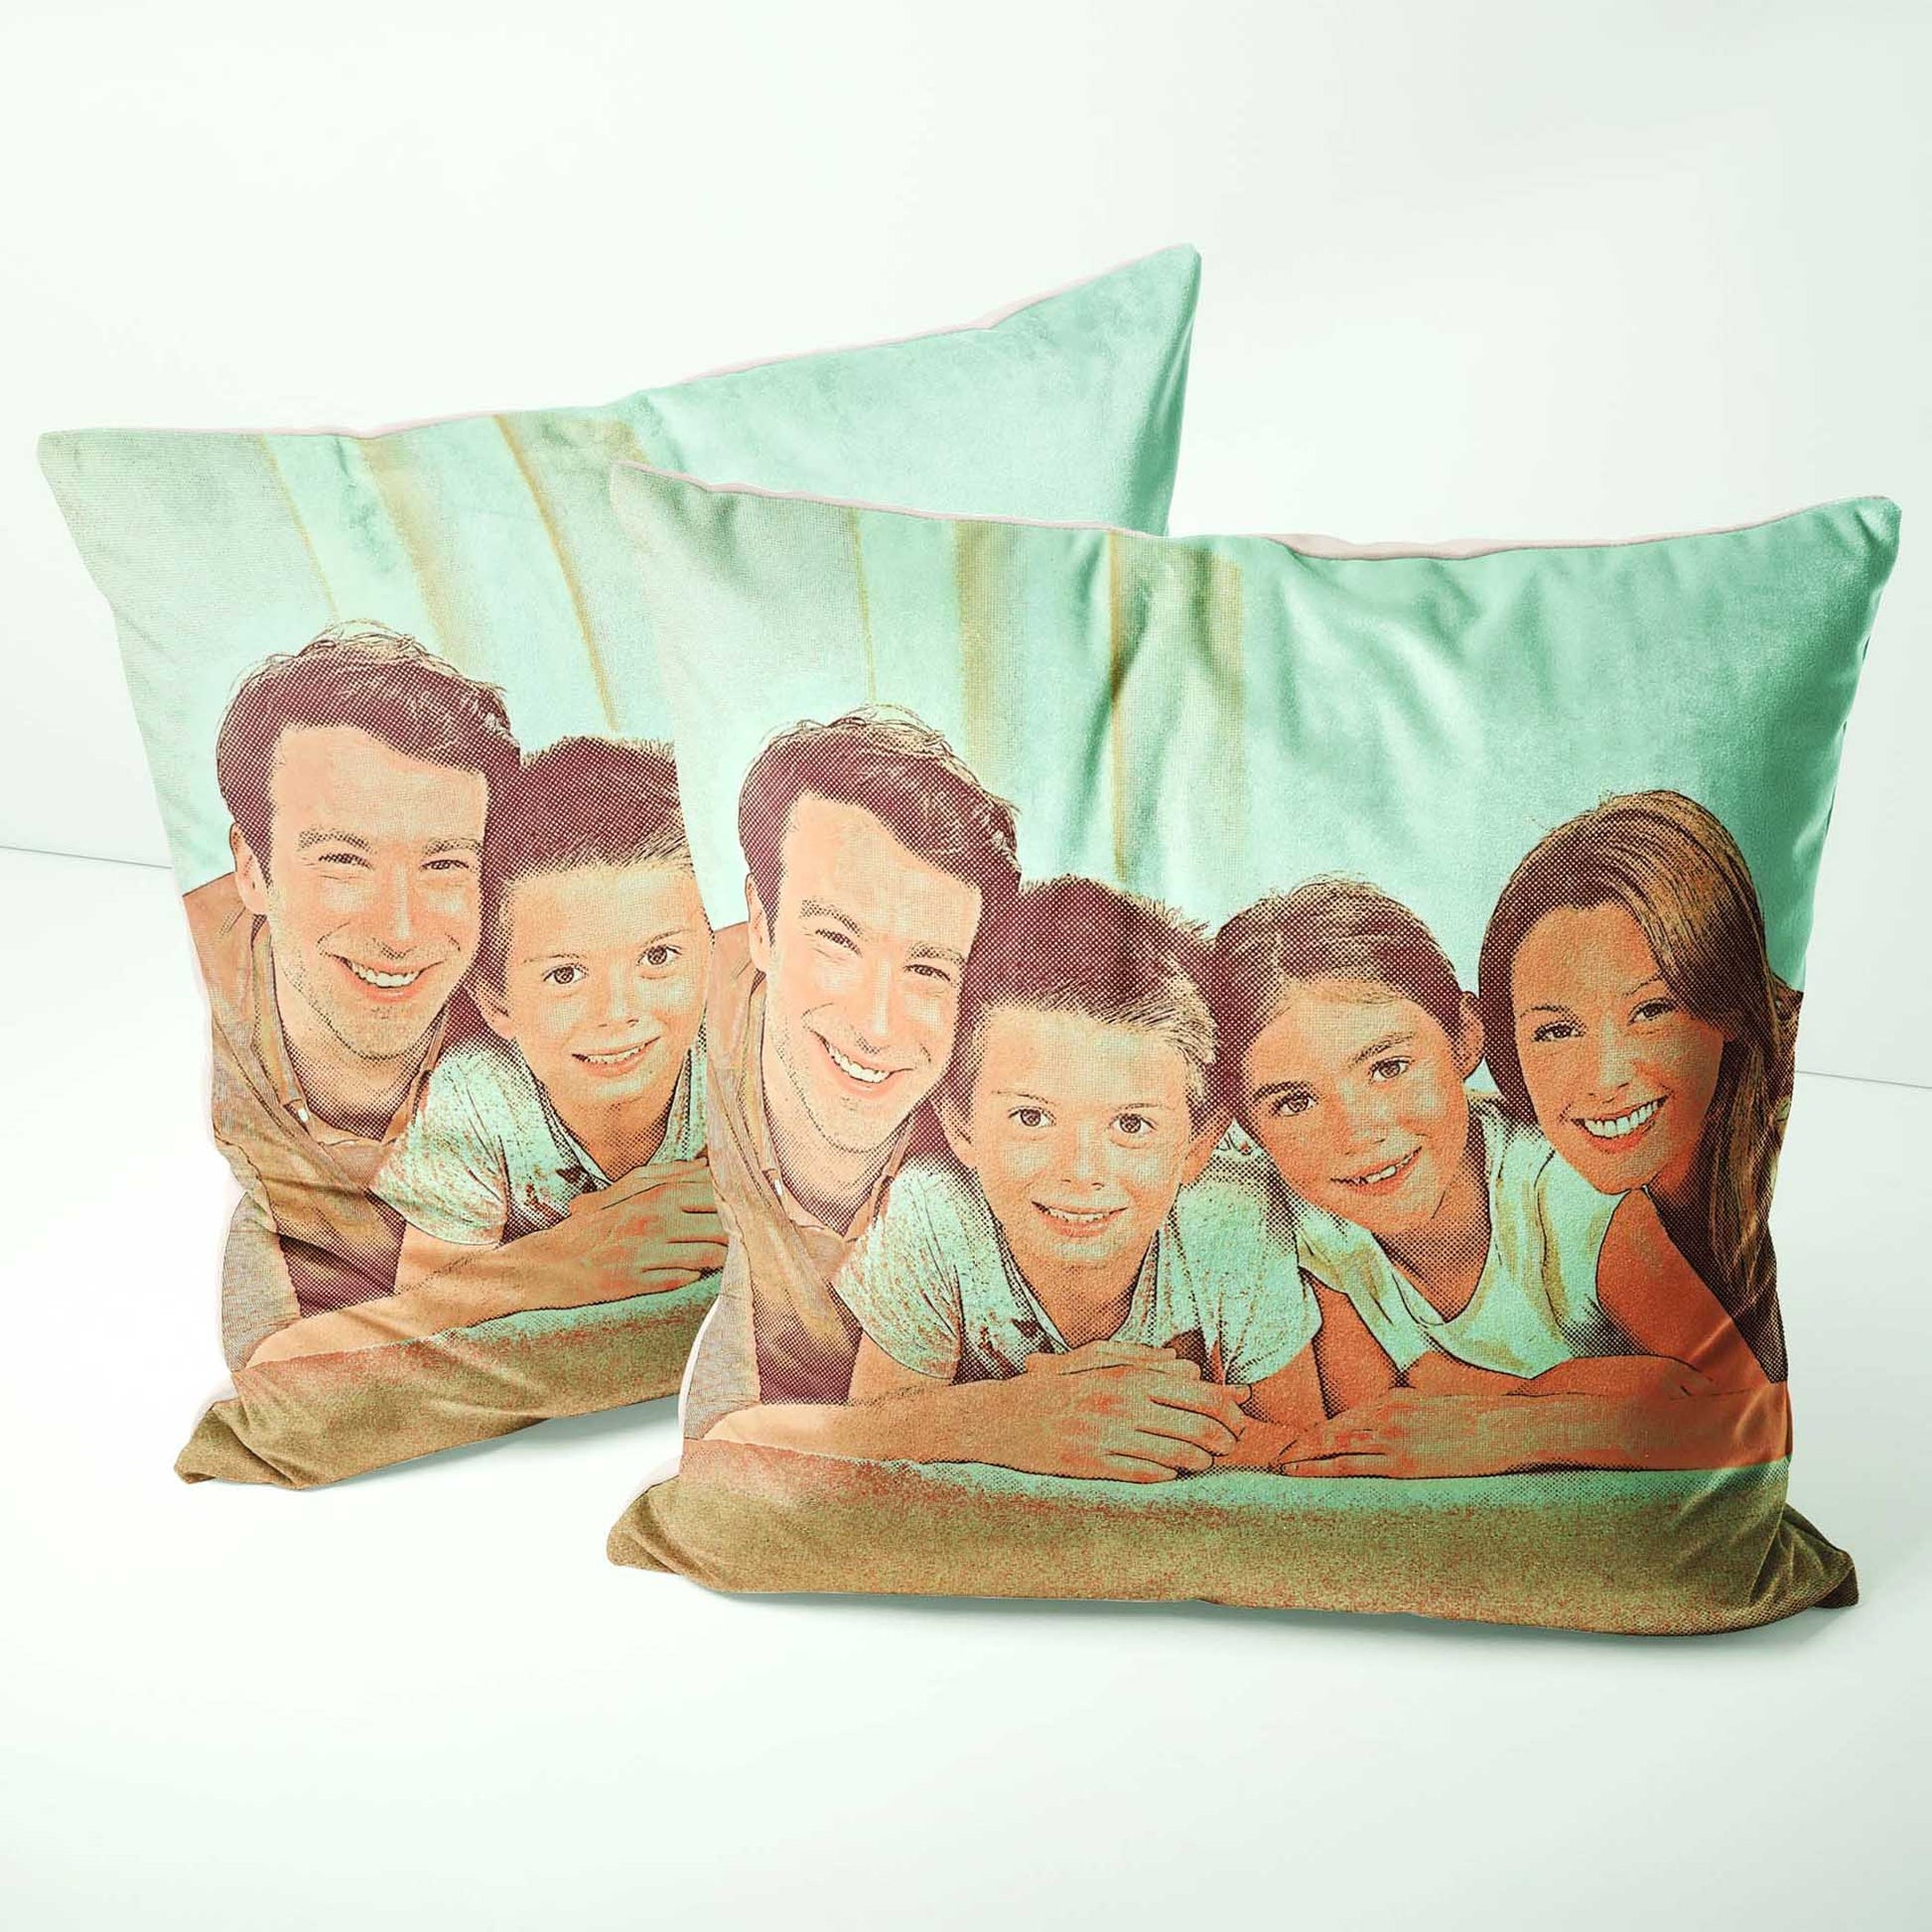 Introduce a touch of modernity and style to your home decor with the Personalised Orange and Green Cushion. This custom-designed cushion showcases a vibrant digital art print, created from your own photo, for a fresh and trendy look